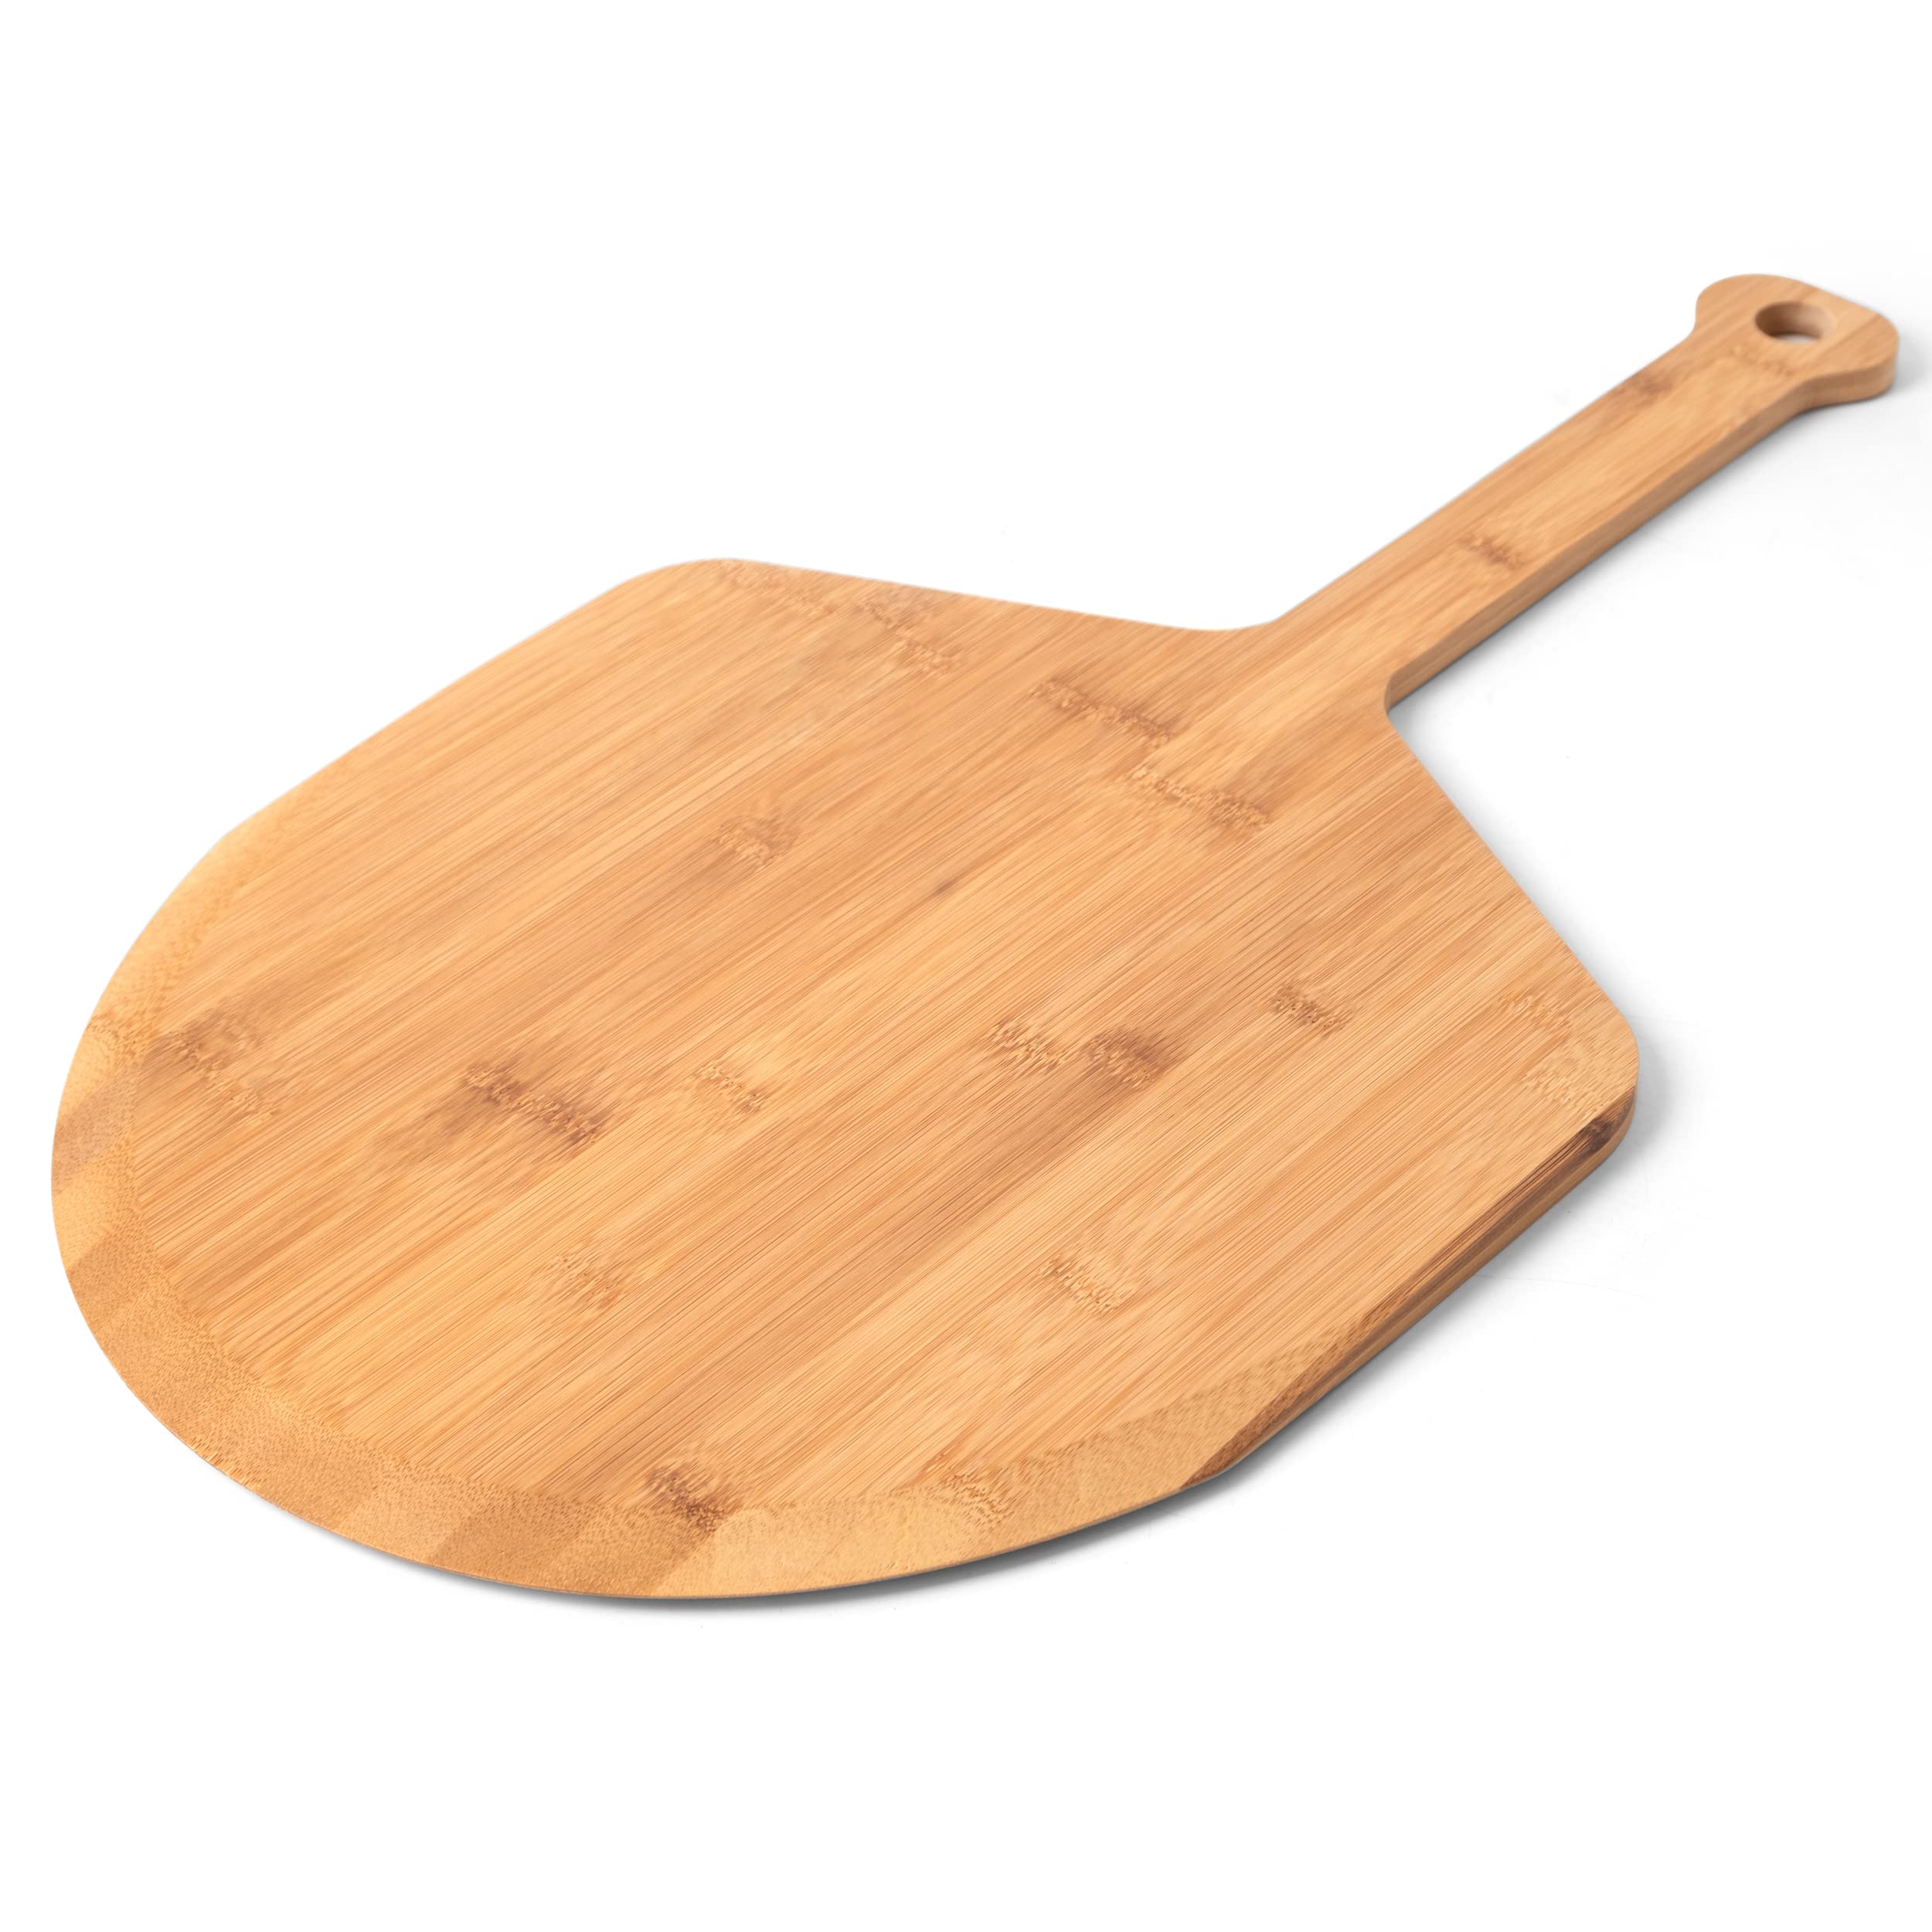 Azlan\'s Essentials Azlan's Essentials Wood Pizza Peel 16 Inch - Sustainably Sourced Wooden Bamboo Pizza Paddle with Ergonomic Handle For Baking Hom